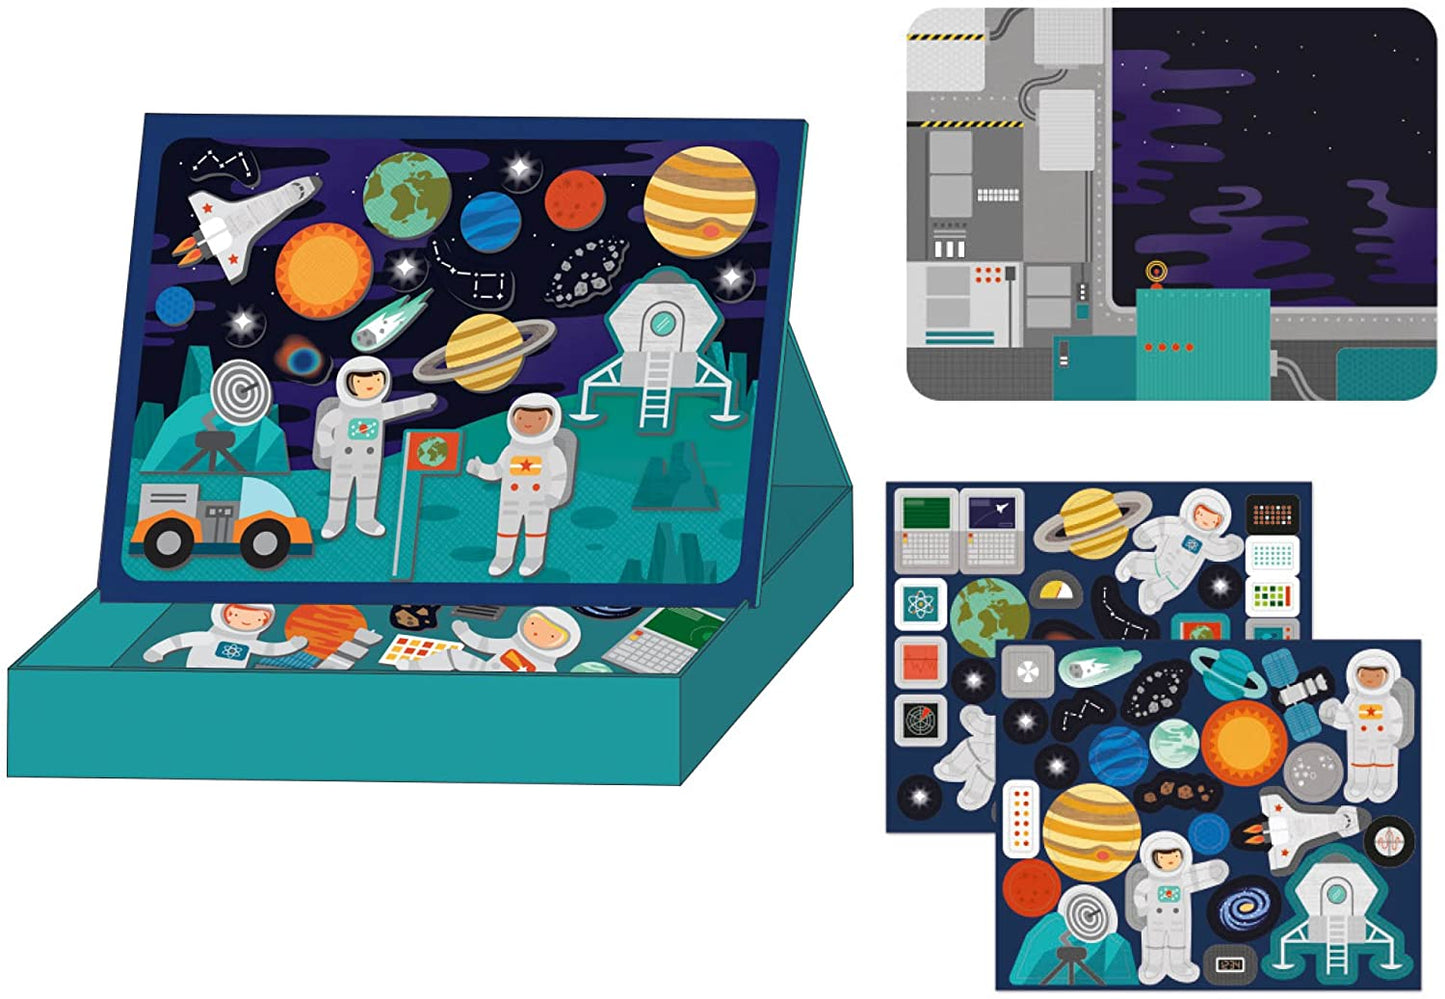 Magnetic Play Scene Outer Space